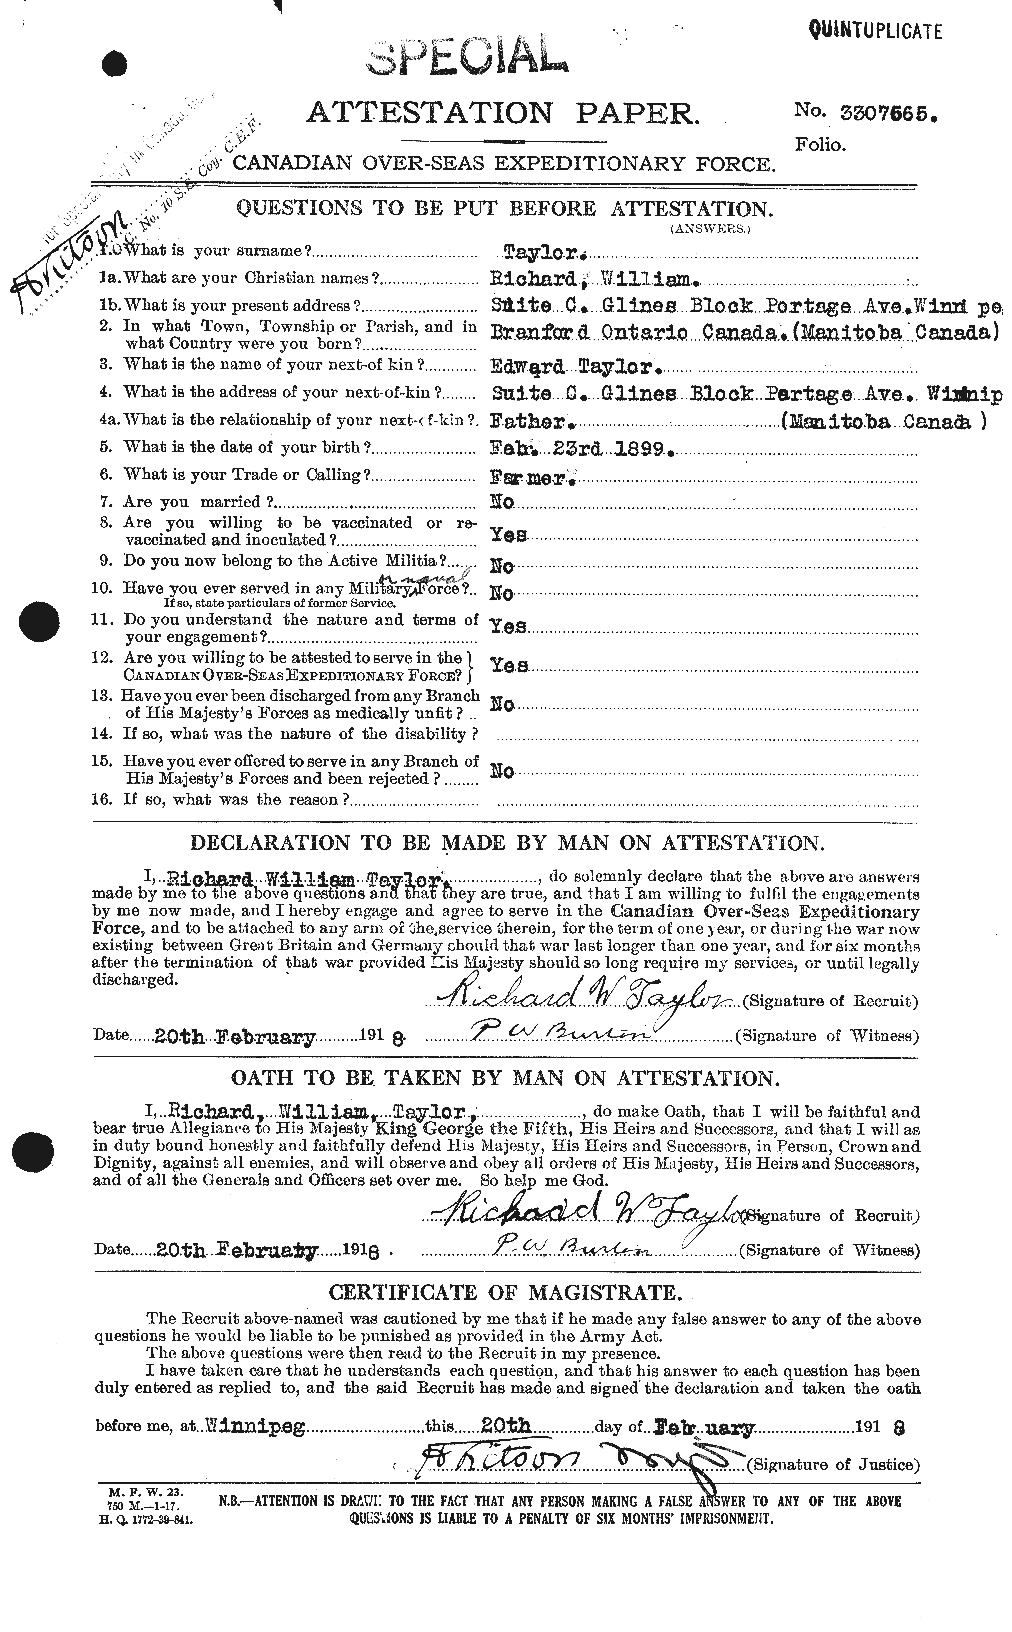 Personnel Records of the First World War - CEF 627422a